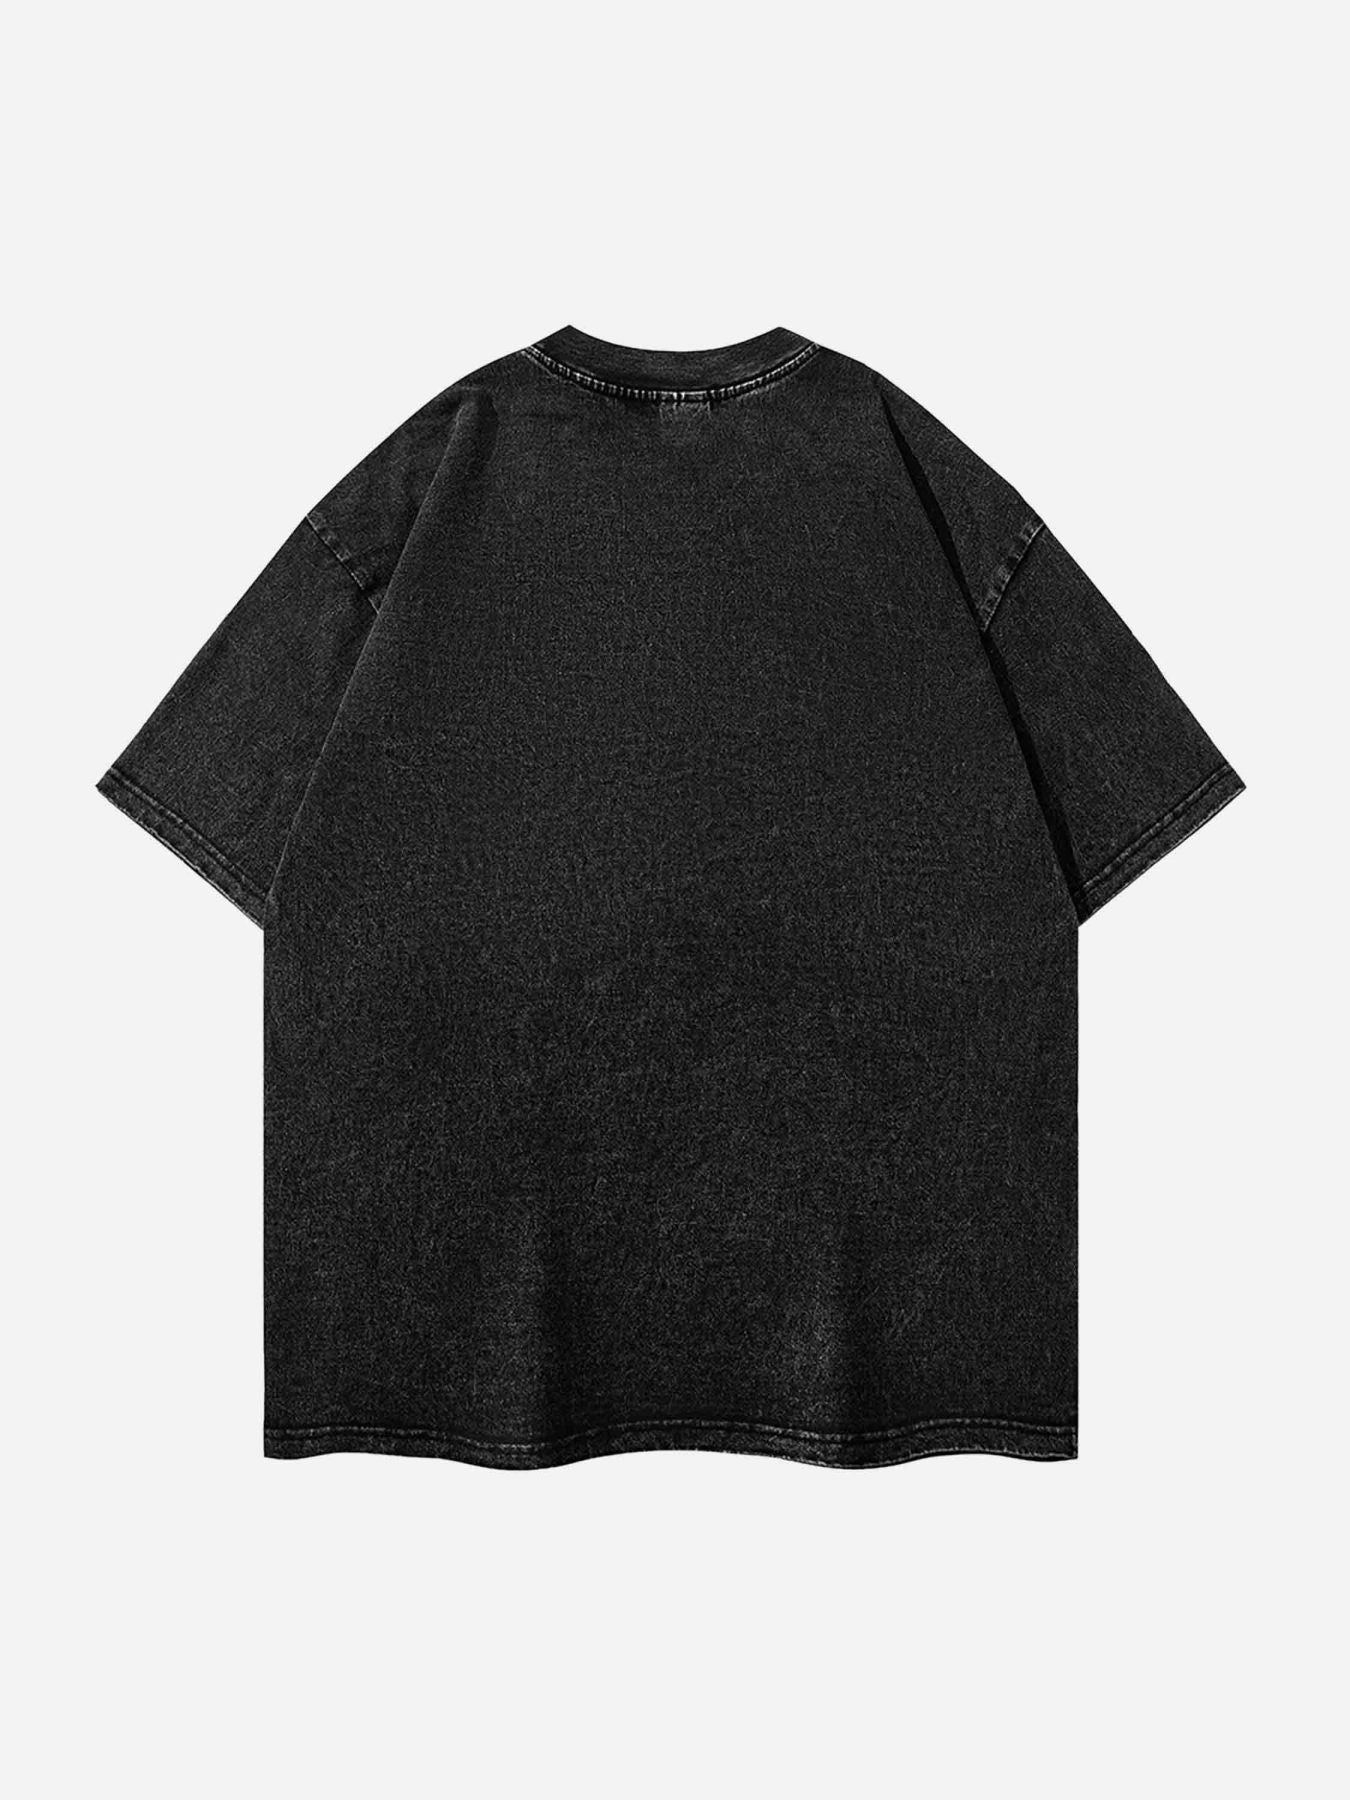 Thesupermade 260g Heavy Weight Washed And Aged T-shirt